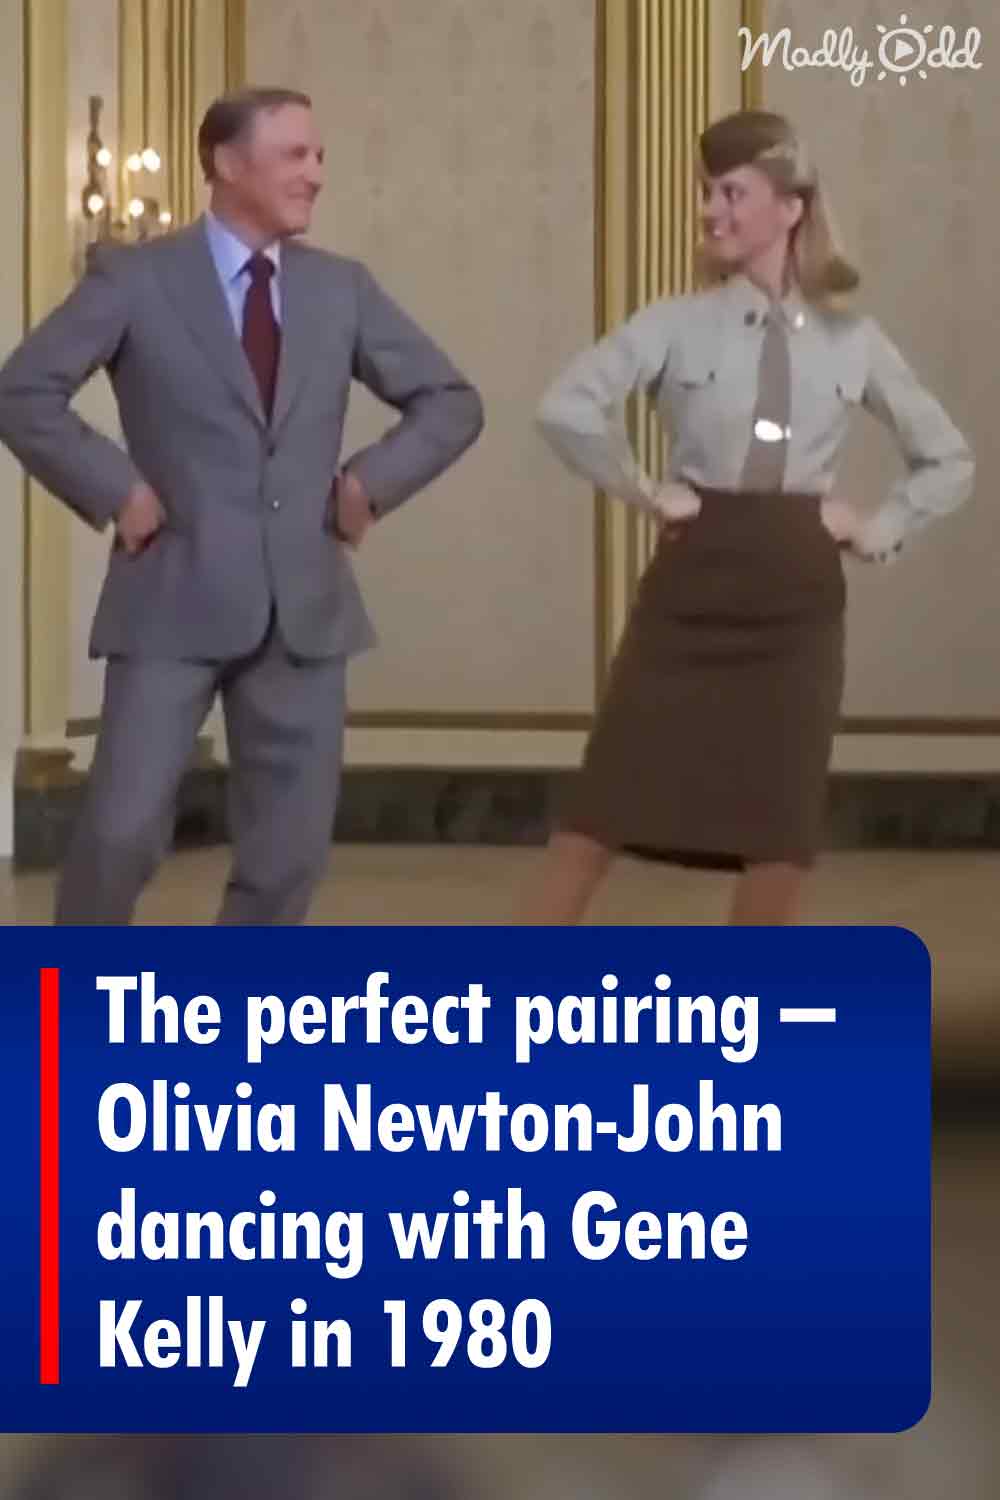 The perfect pairing – Olivia Newton-John dancing with Gene Kelly in 1980